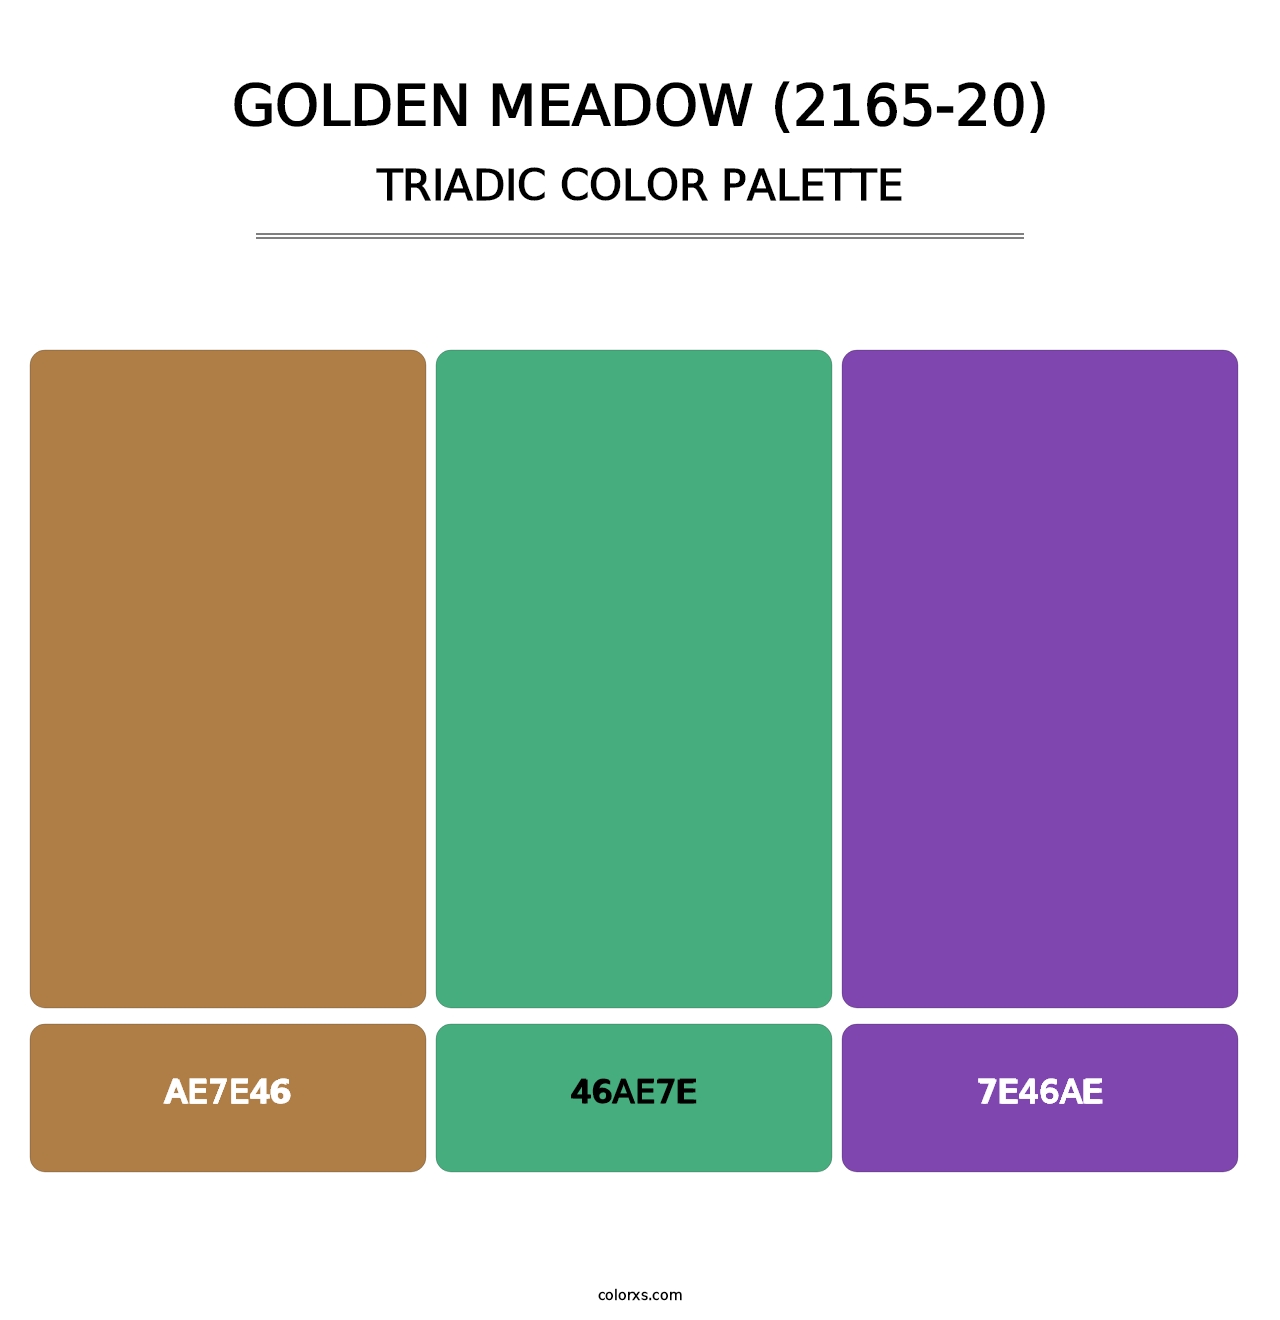 Golden Meadow (2165-20) - Triadic Color Palette